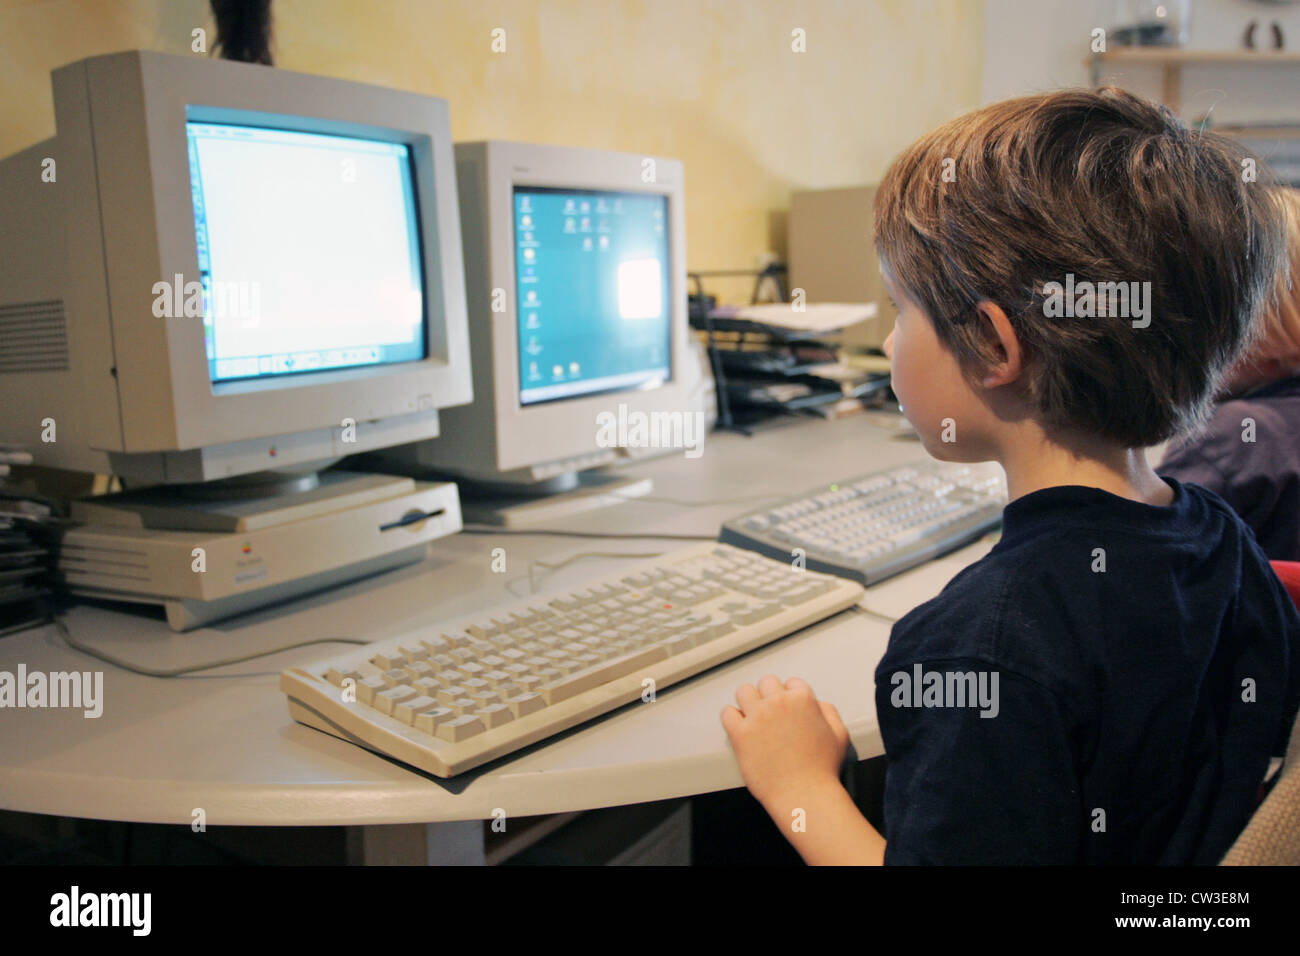 Berlin, a child sitting in front of a computer Stock Photo - Alamy